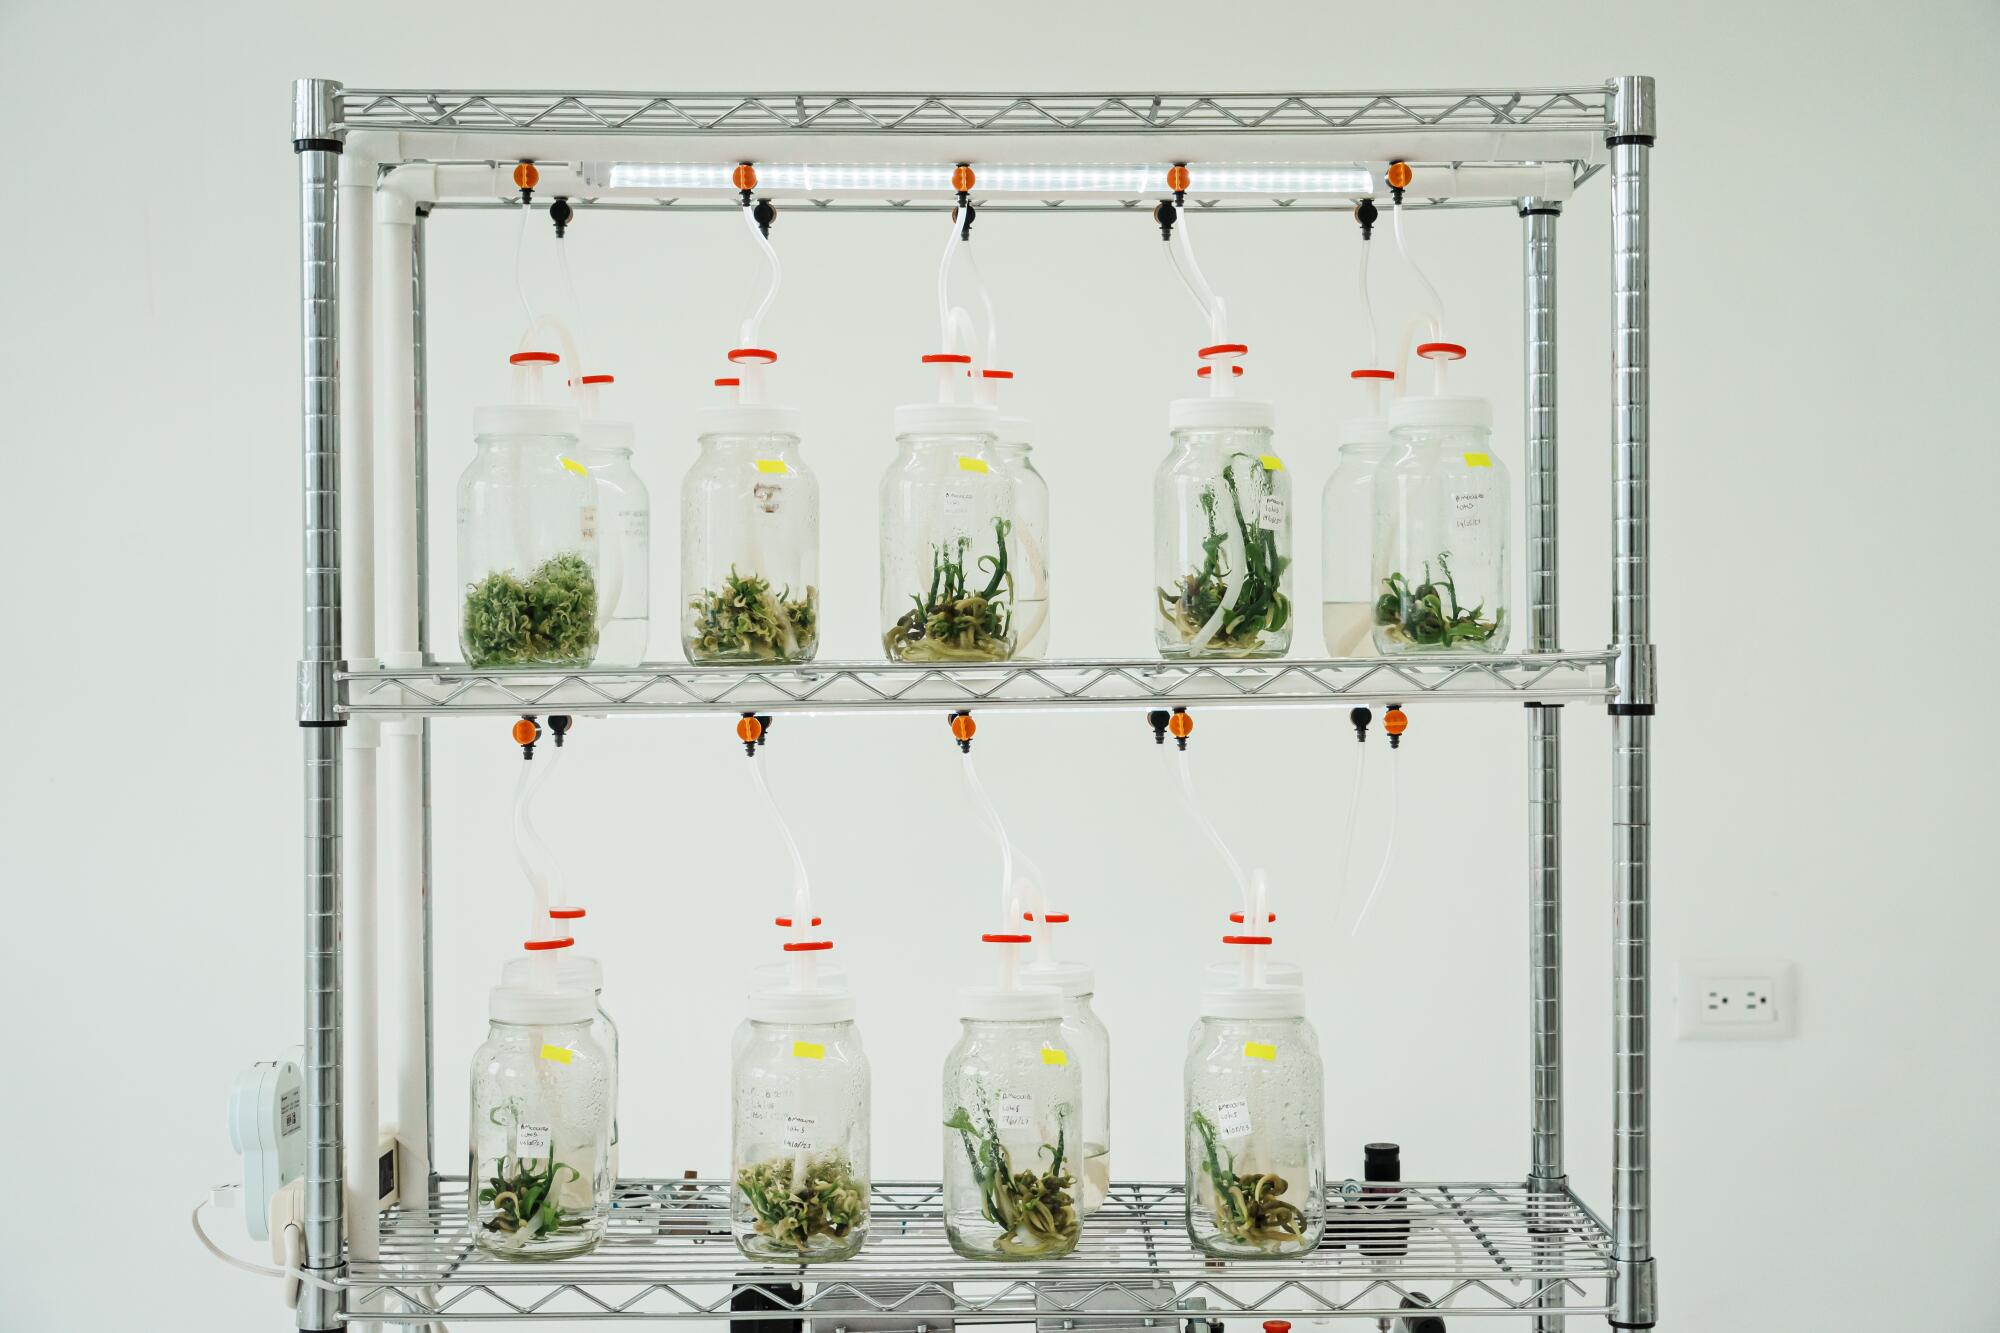 A metal rack holds many glass bottles in which are growing baby vanilla plants.